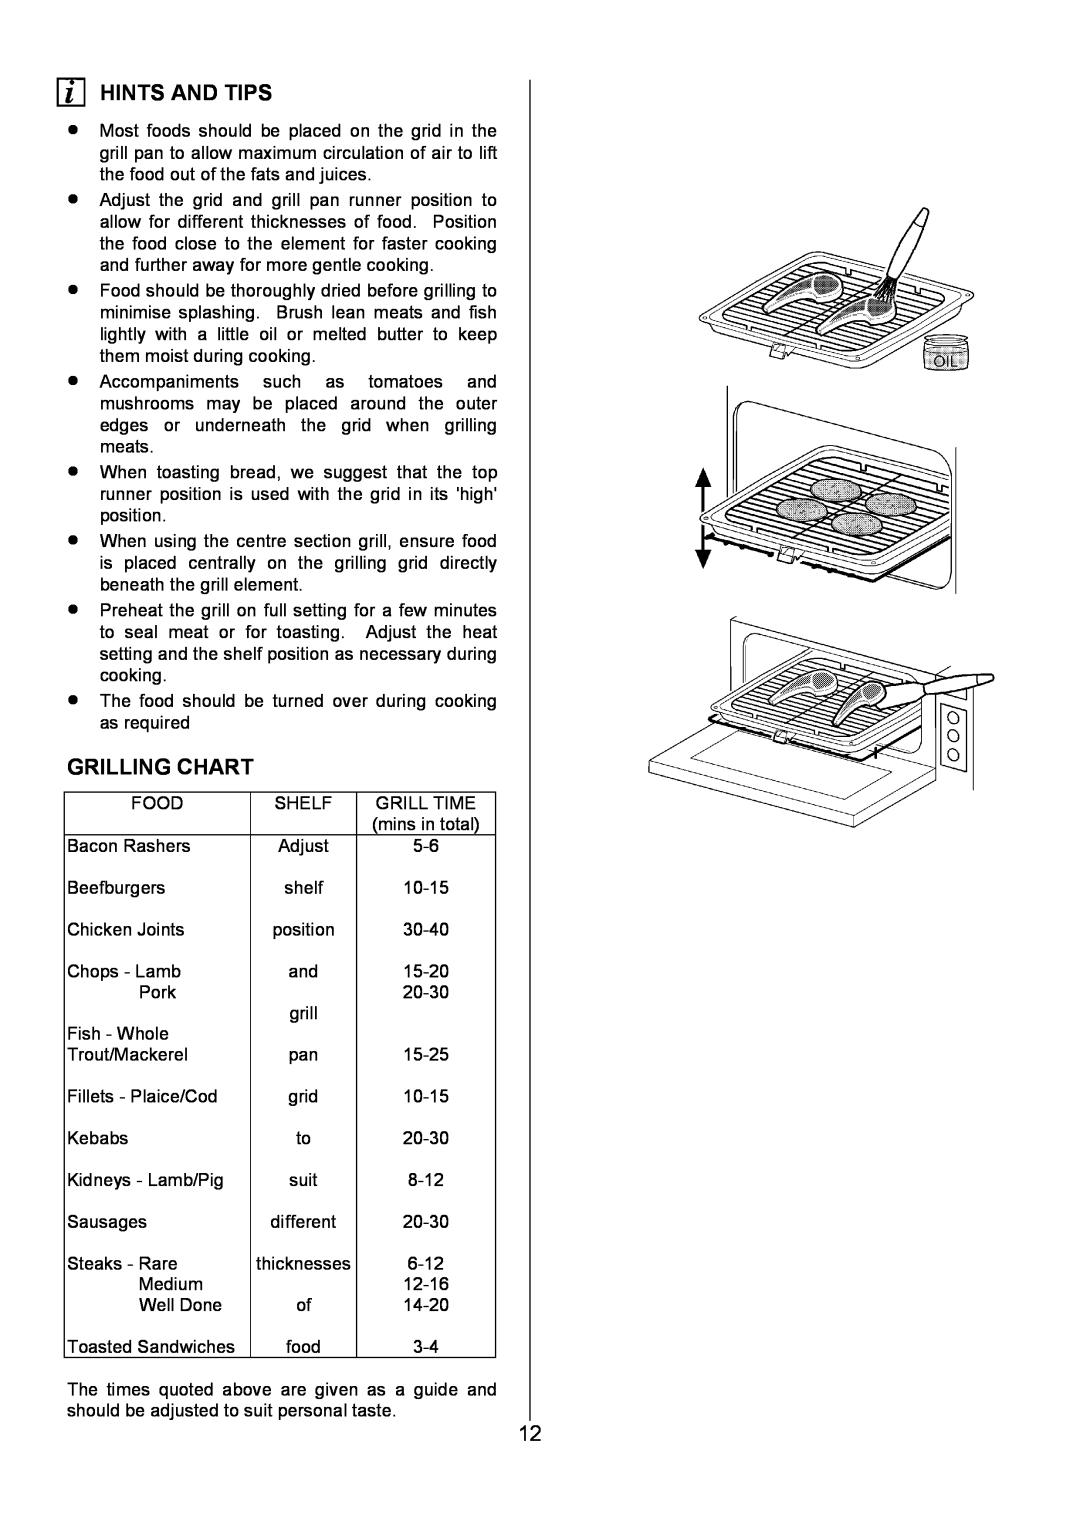 Electrolux U7101-4 operating instructions Hints And Tips, Grilling Chart, suit 